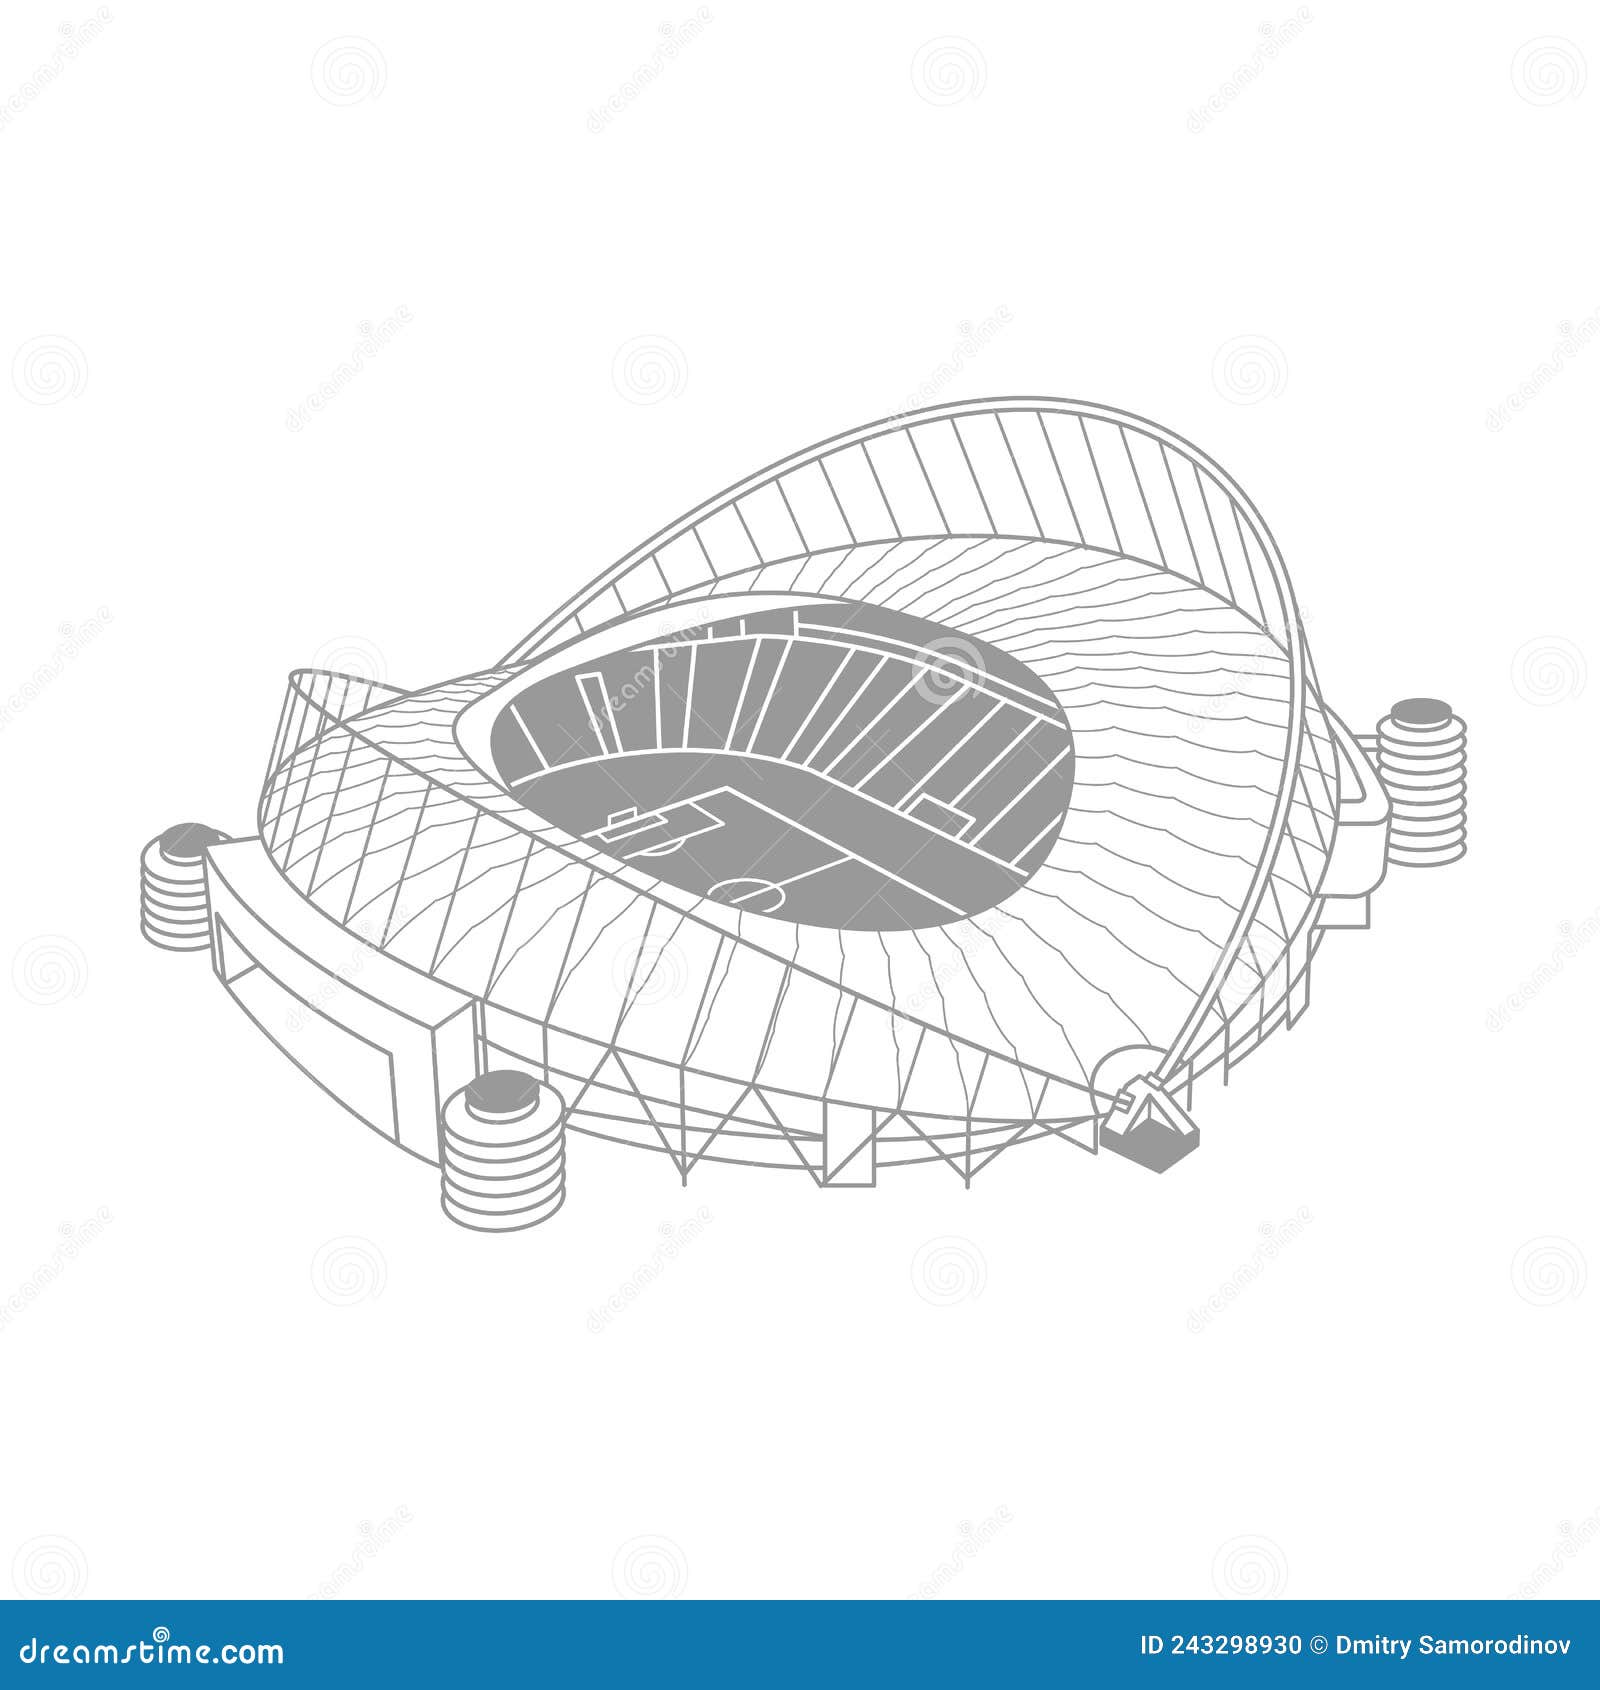 Football Soccer Stadium Drawing, black and white